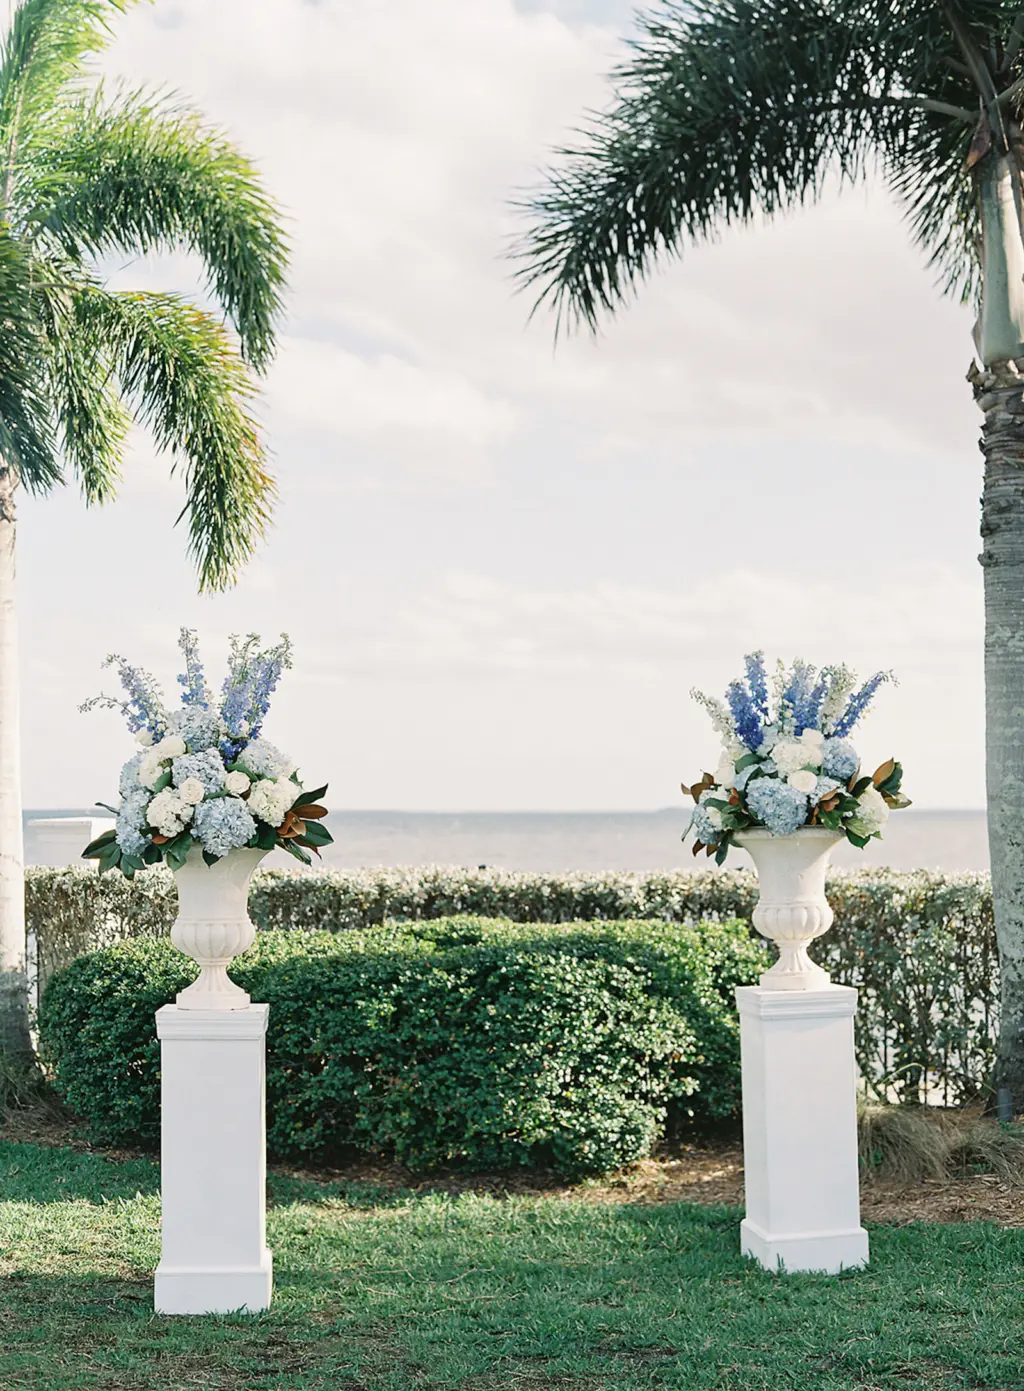 White Classic Vases with Blue Stock Flowers, Hydrangeas, and Greenery for Wedding Ceremony Altar | Tampa Bay Florist Save The Date Florida